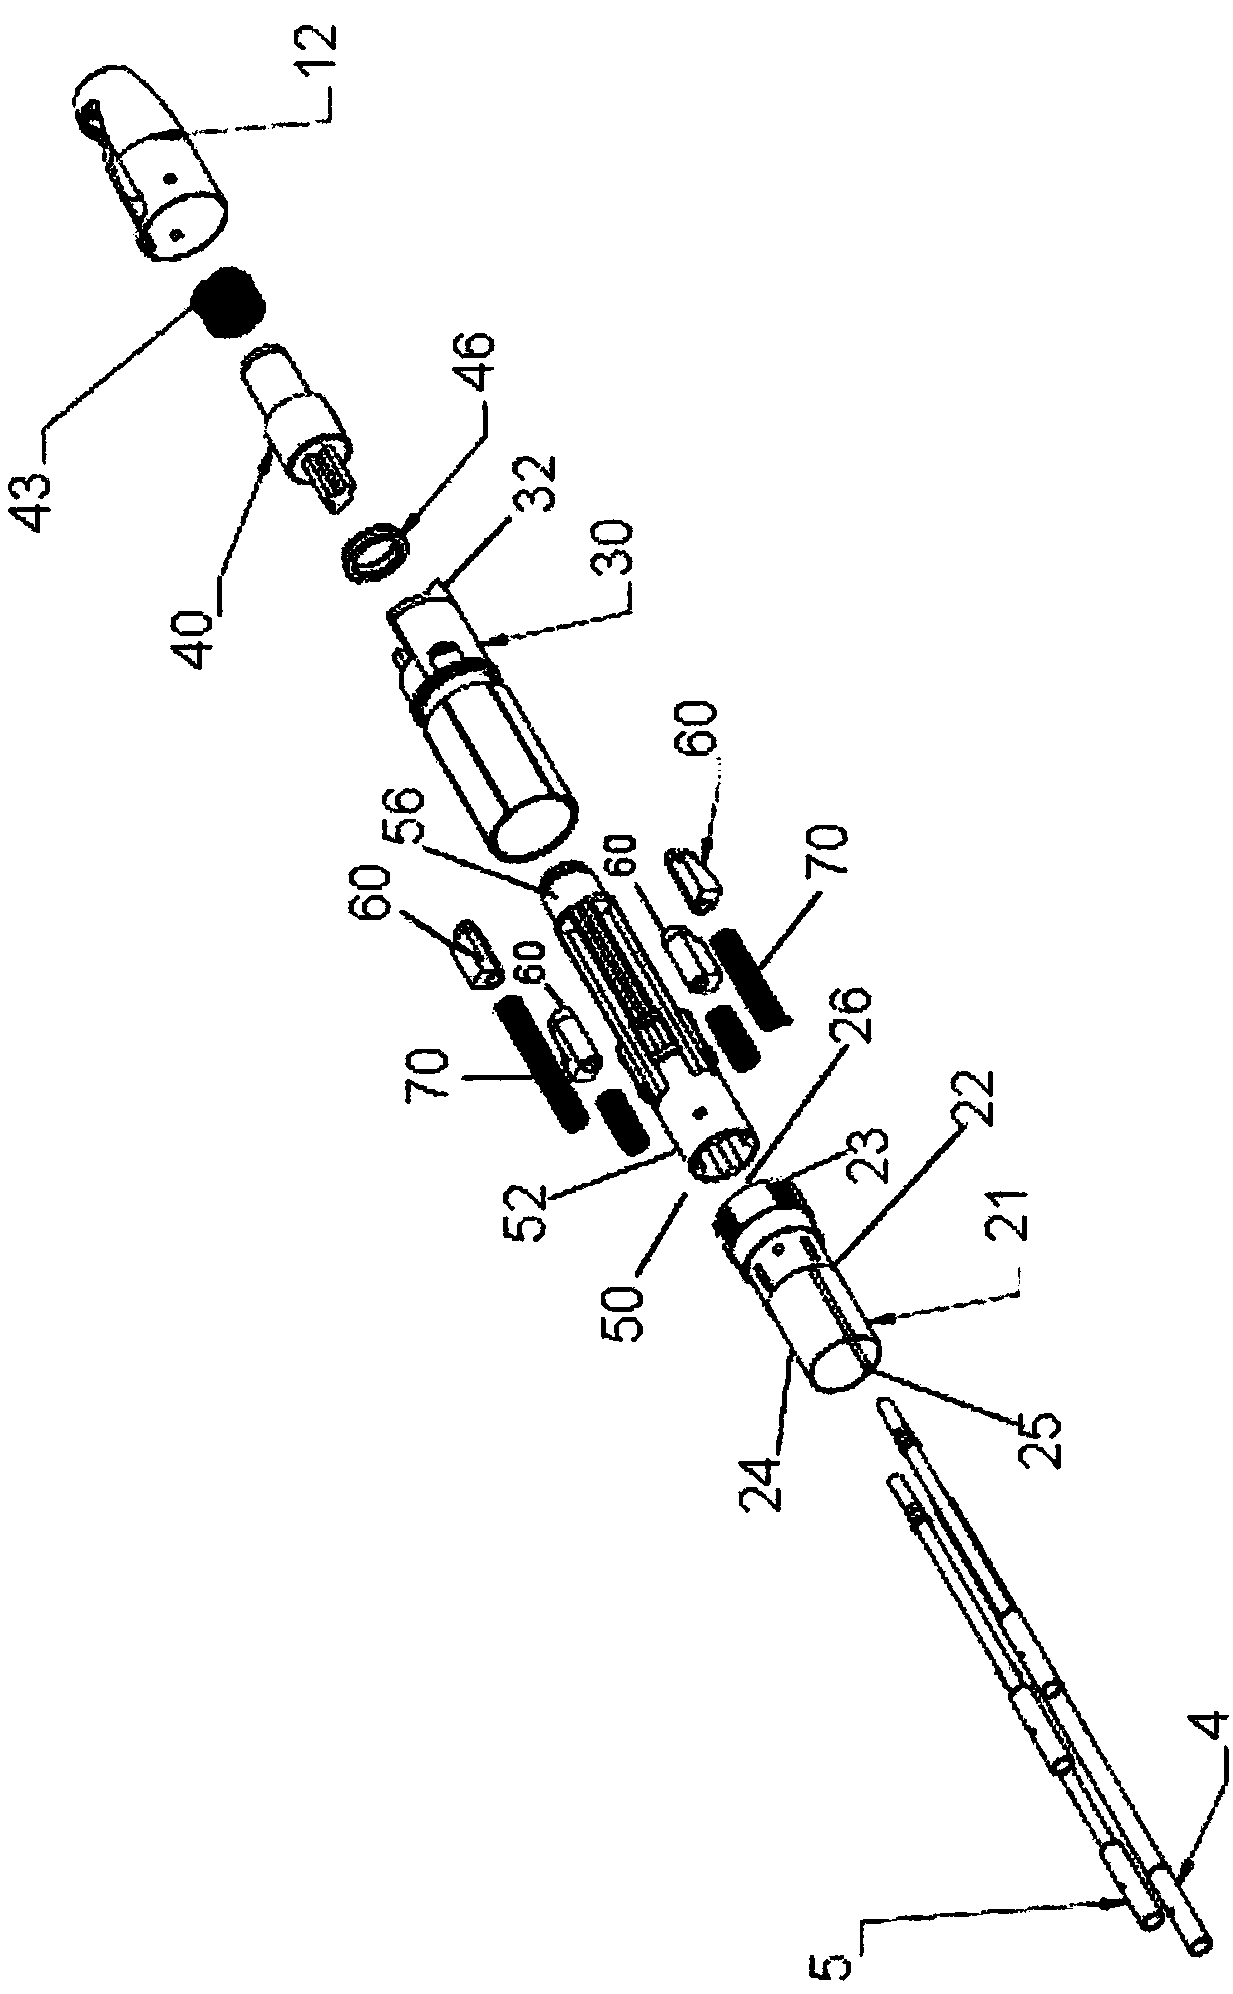 Multi-function writing instrument with propulsion mechanism